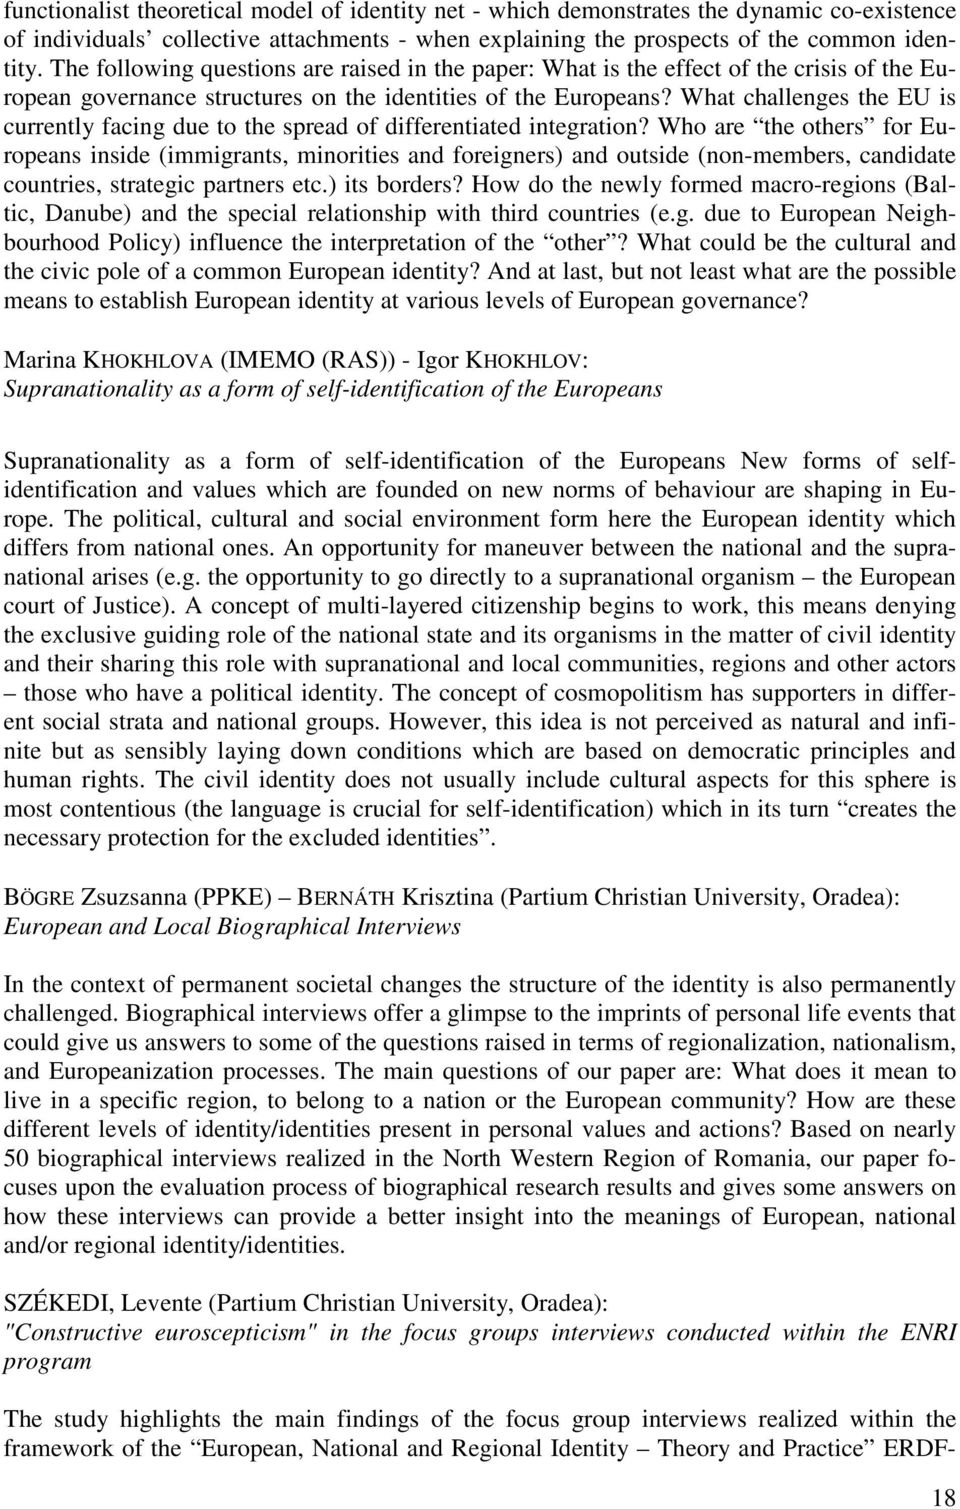 What challenges the EU is currently facing due to the spread of differentiated integration?